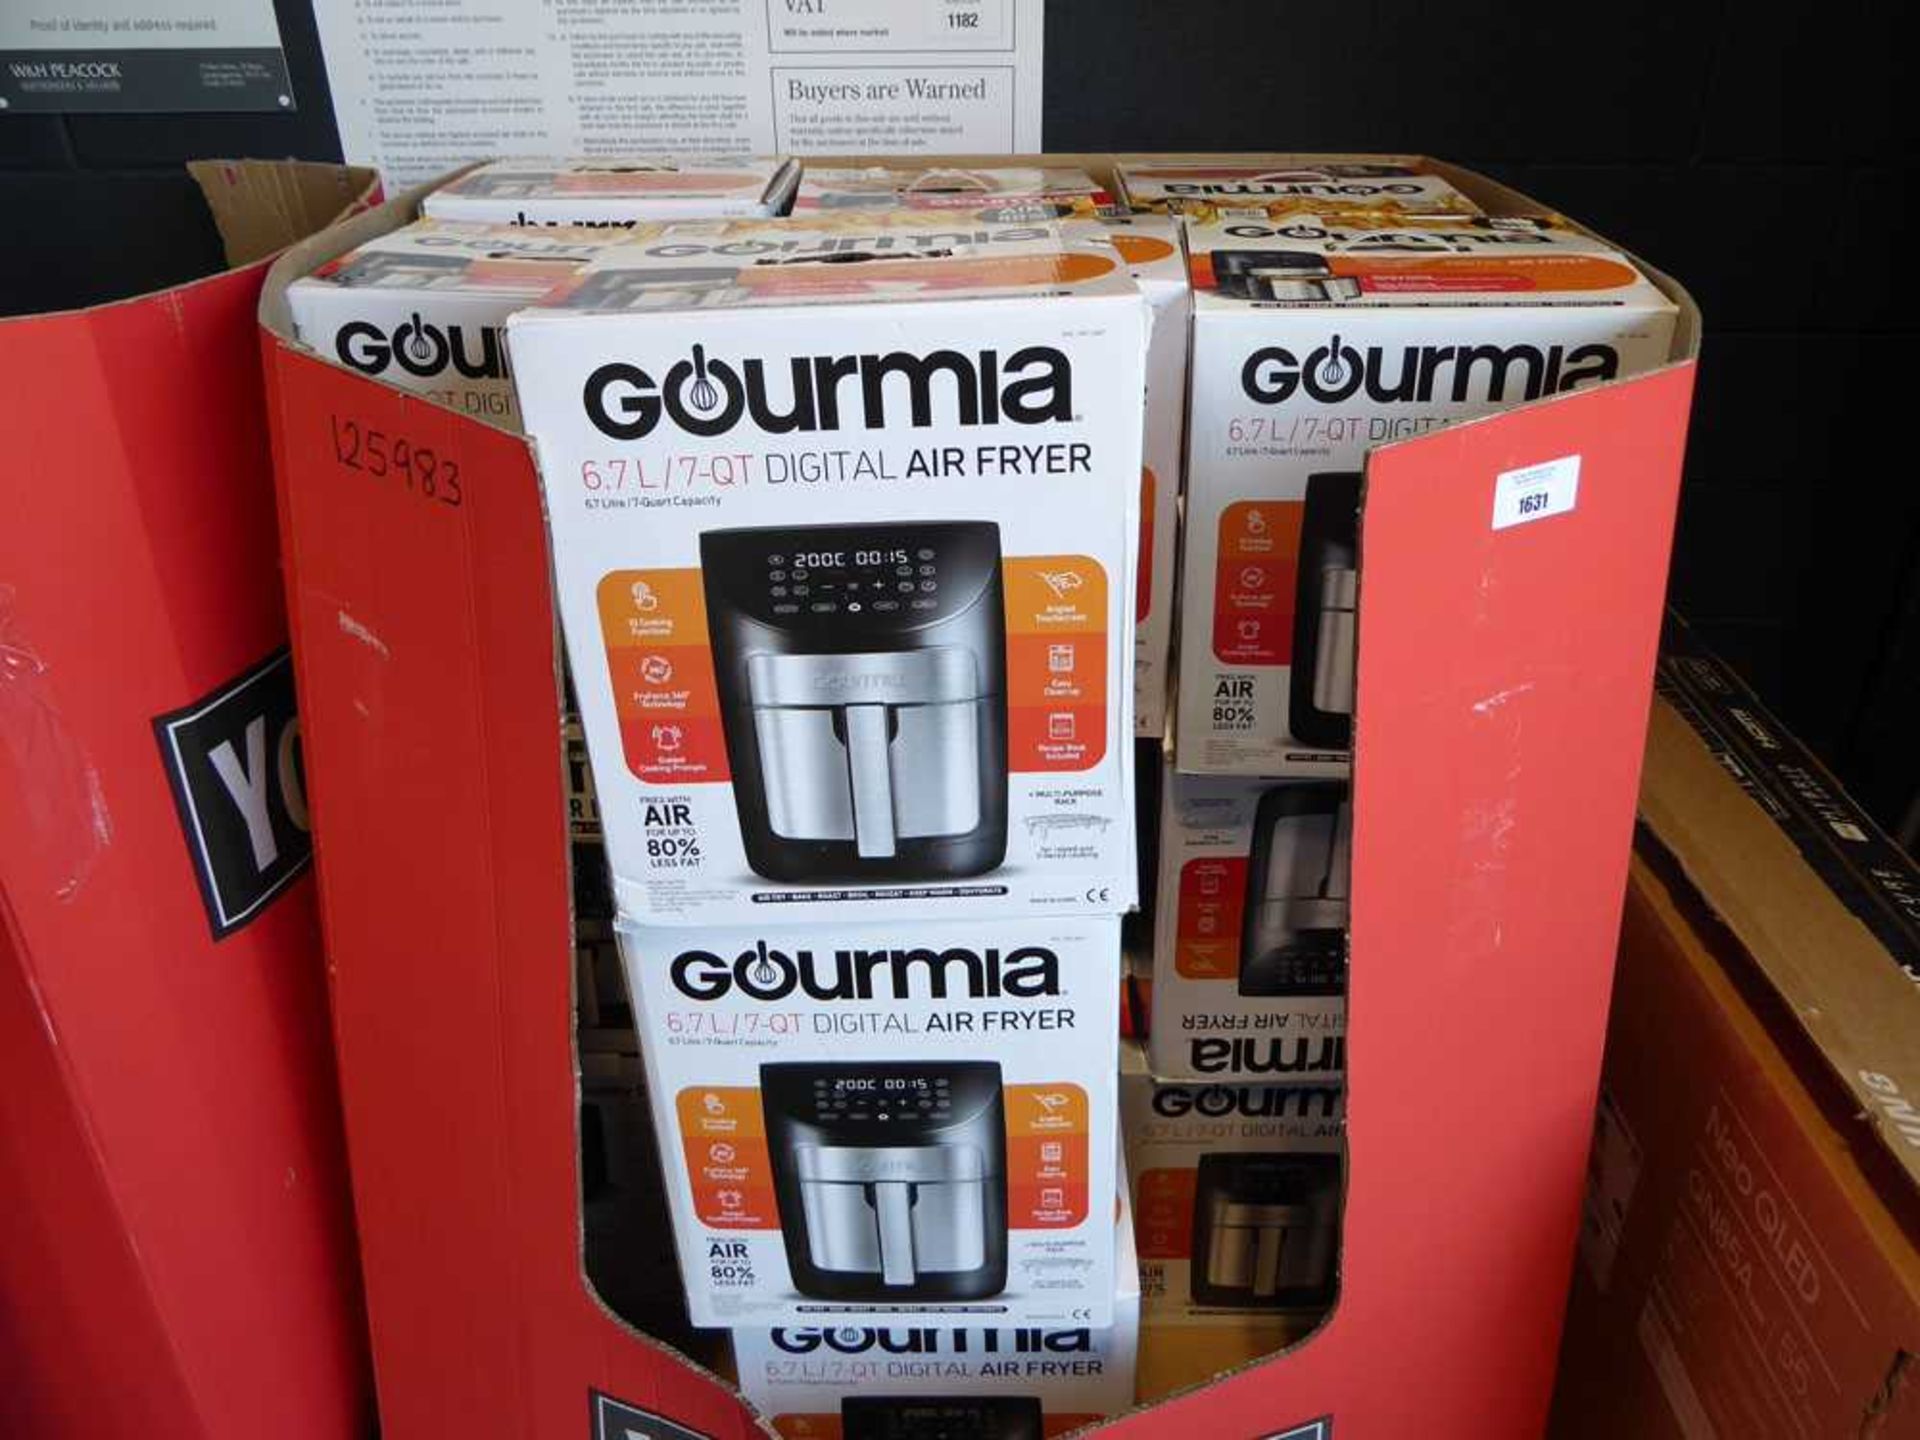 +VAT Pallet box containing approx. 21 boxed Gourmia digital air fryers